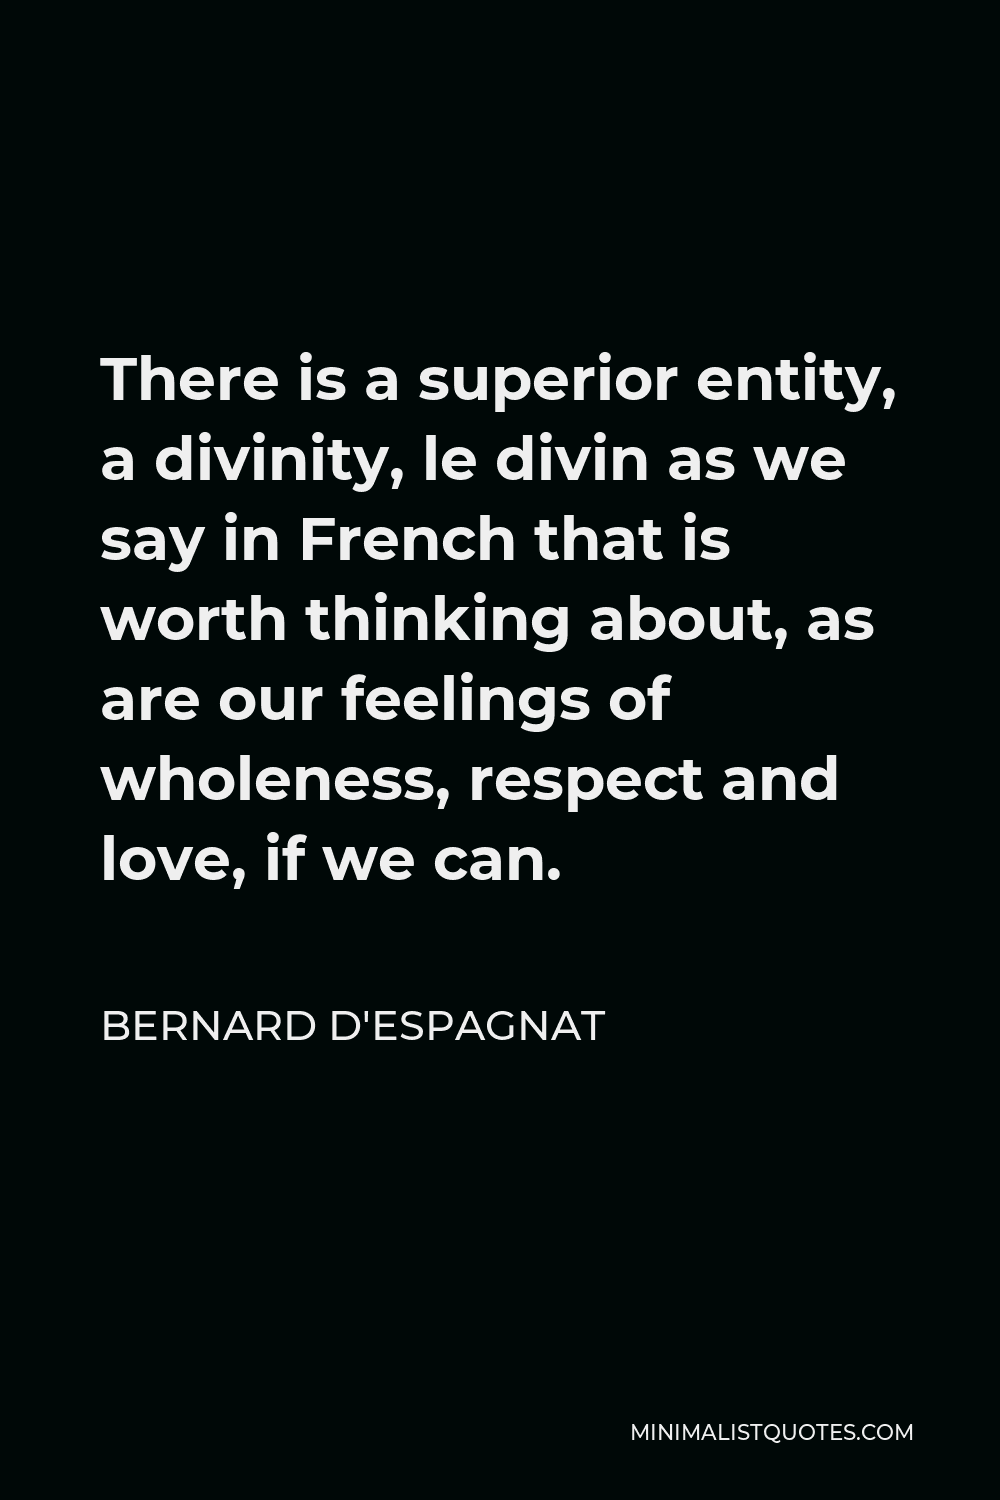 Bernard d'Espagnat Quote - There is a superior entity, a divinity, le divin as we say in French that is worth thinking about, as are our feelings of wholeness, respect and love, if we can.